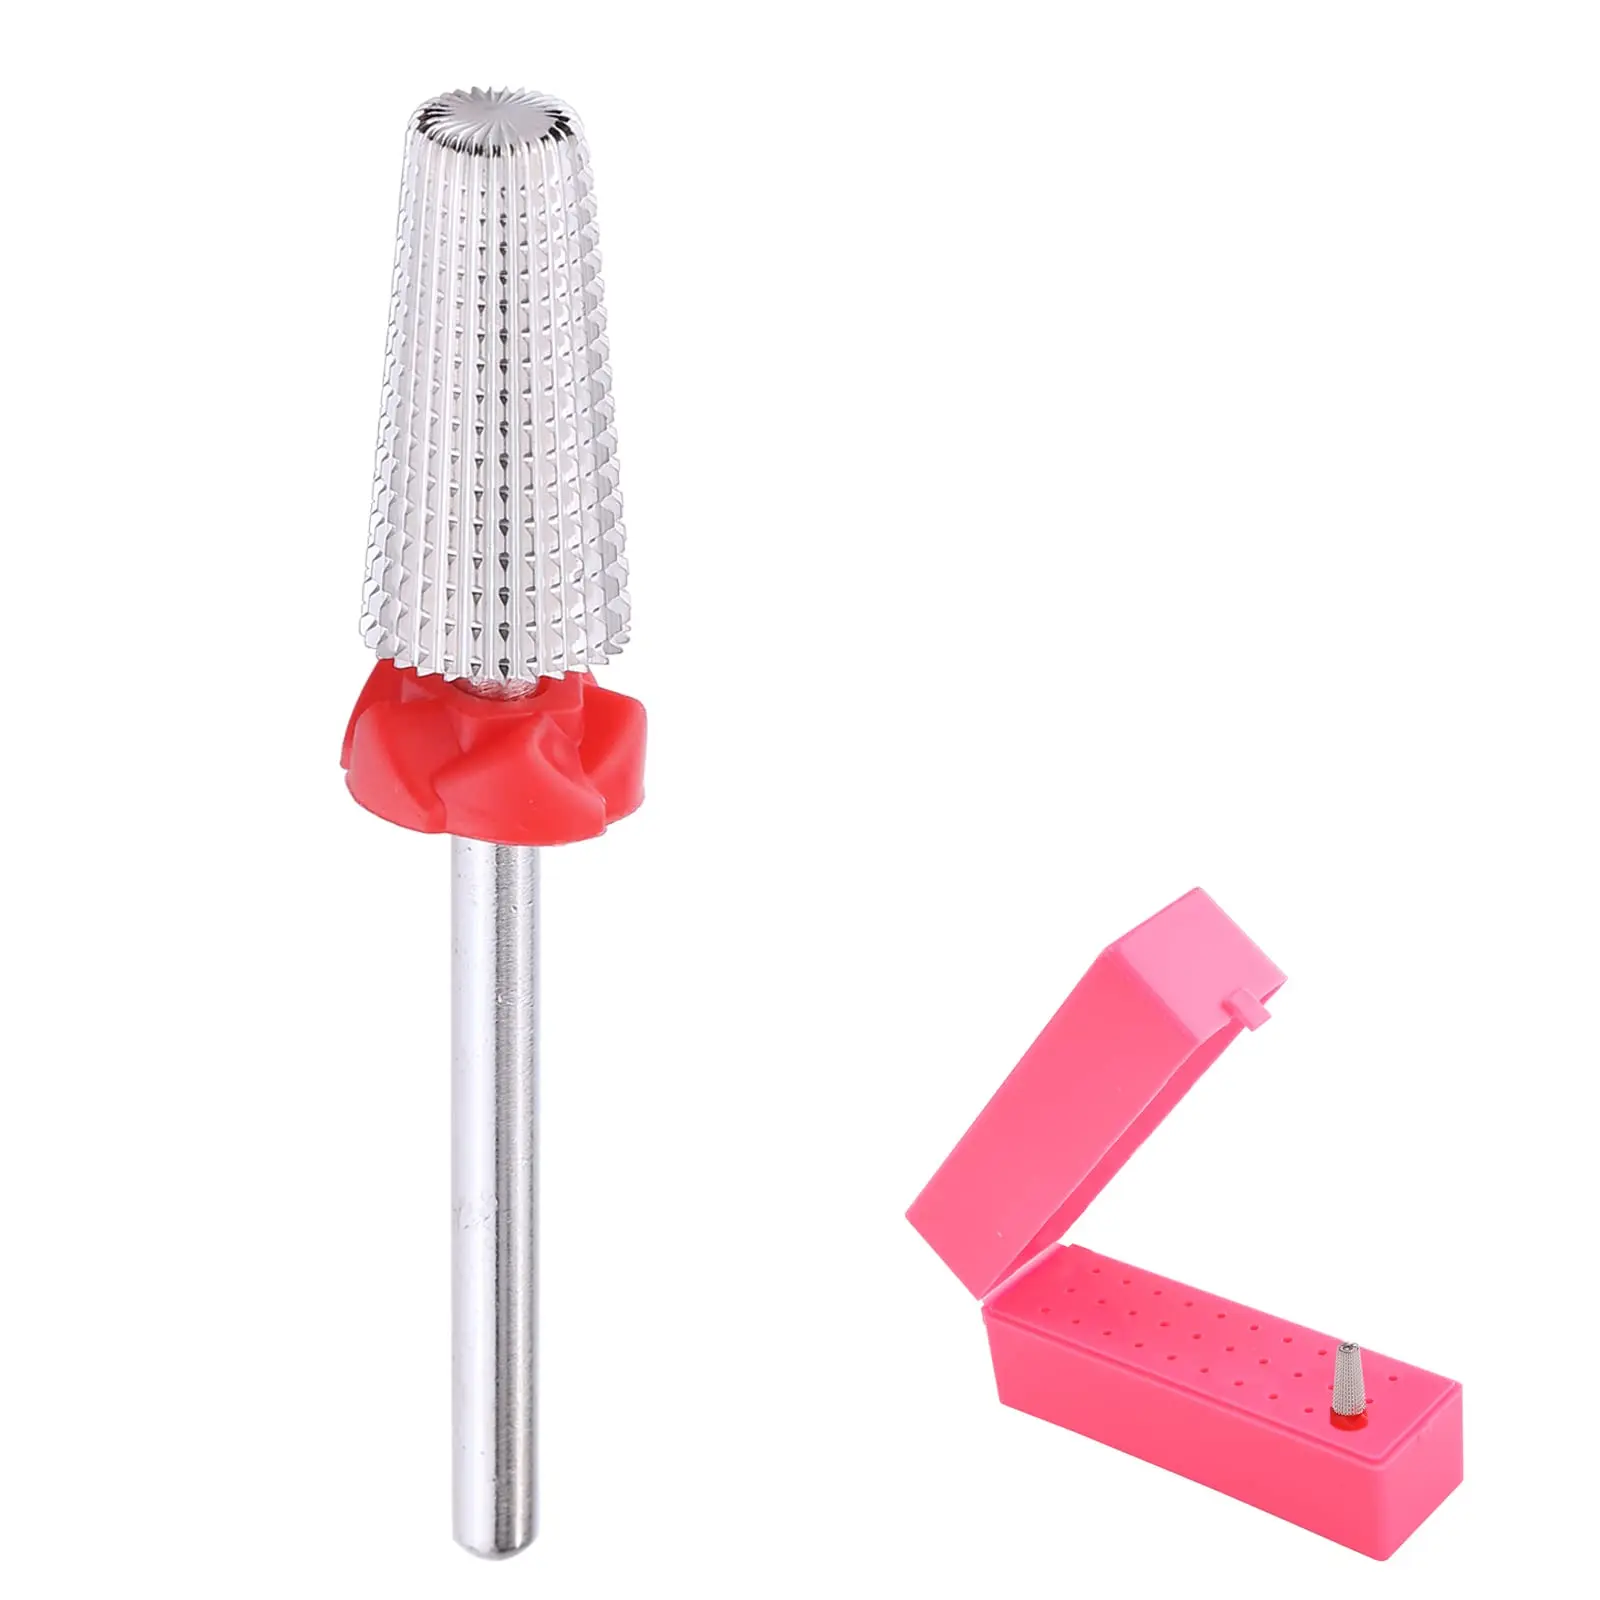 30 Holes Nail Bit Holder with 5 In 1 Tungsten Nail Drill Bits Storage Pink for Nail Salon Manicure Accessories